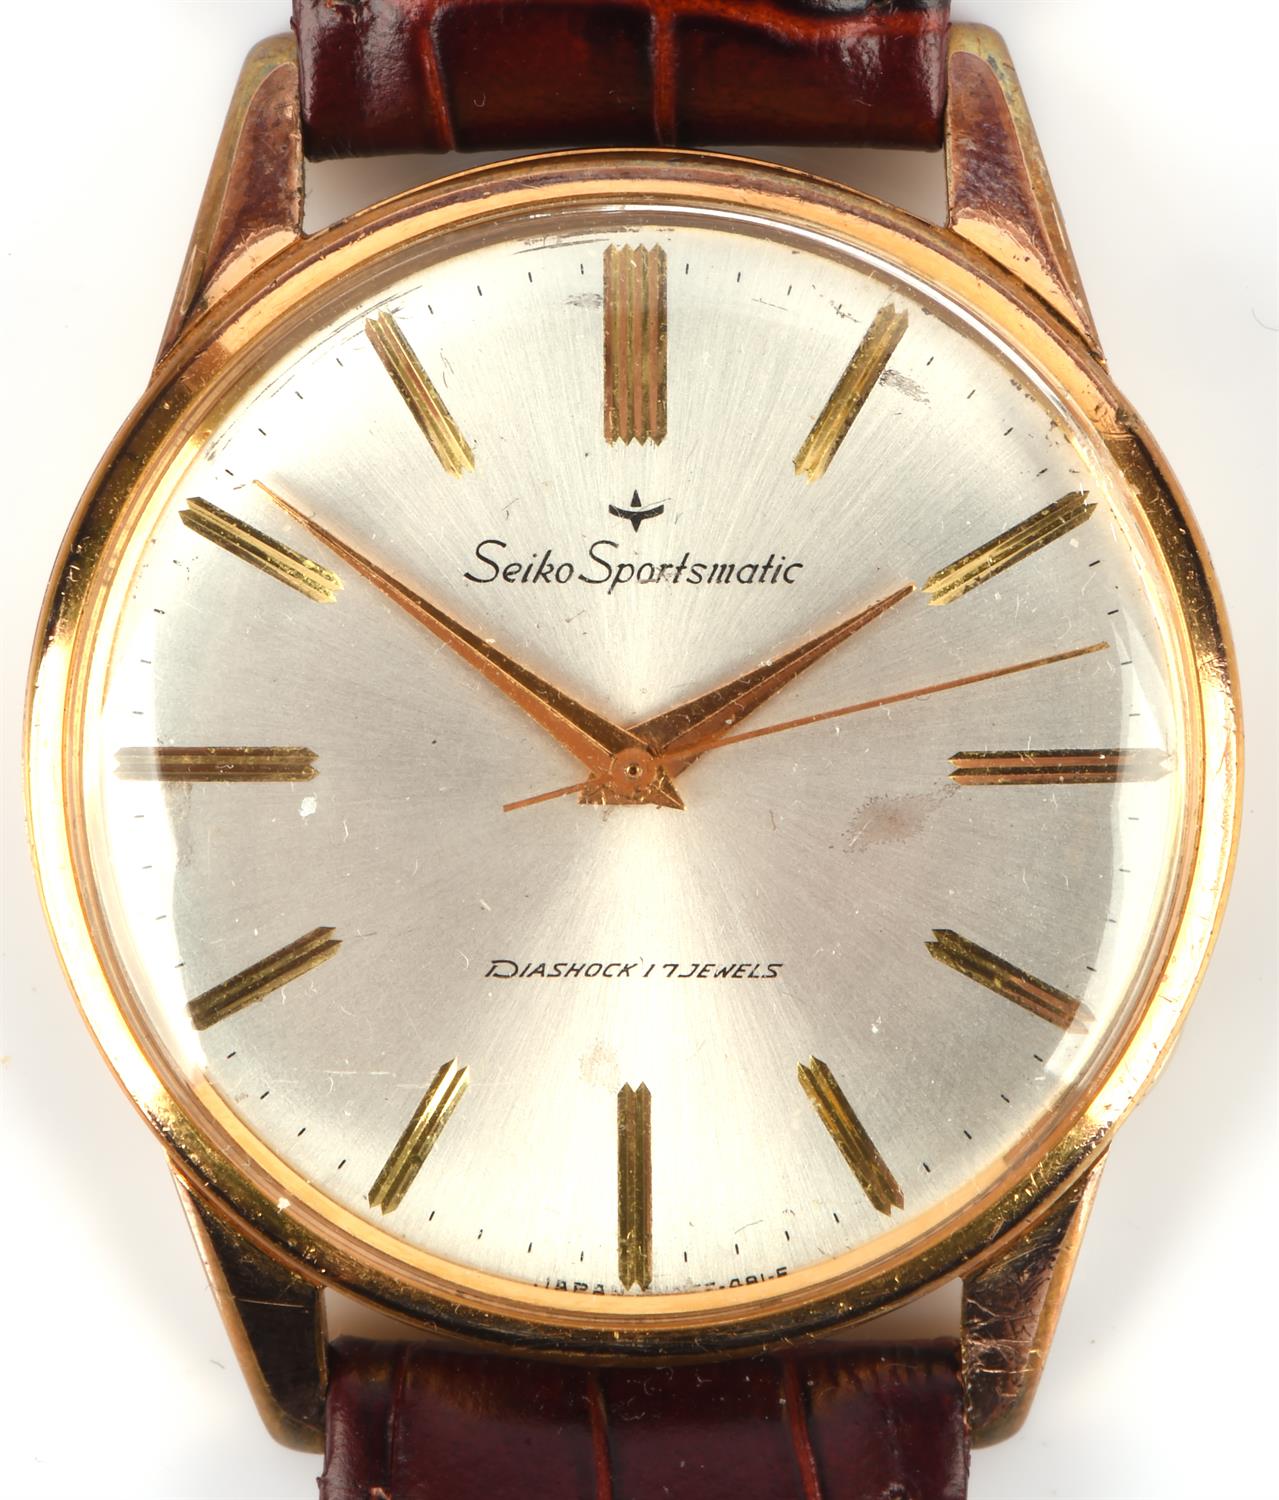 Seiko a Gentleman's diashock gold plated wristwatch the signed dial with baton hour markers and